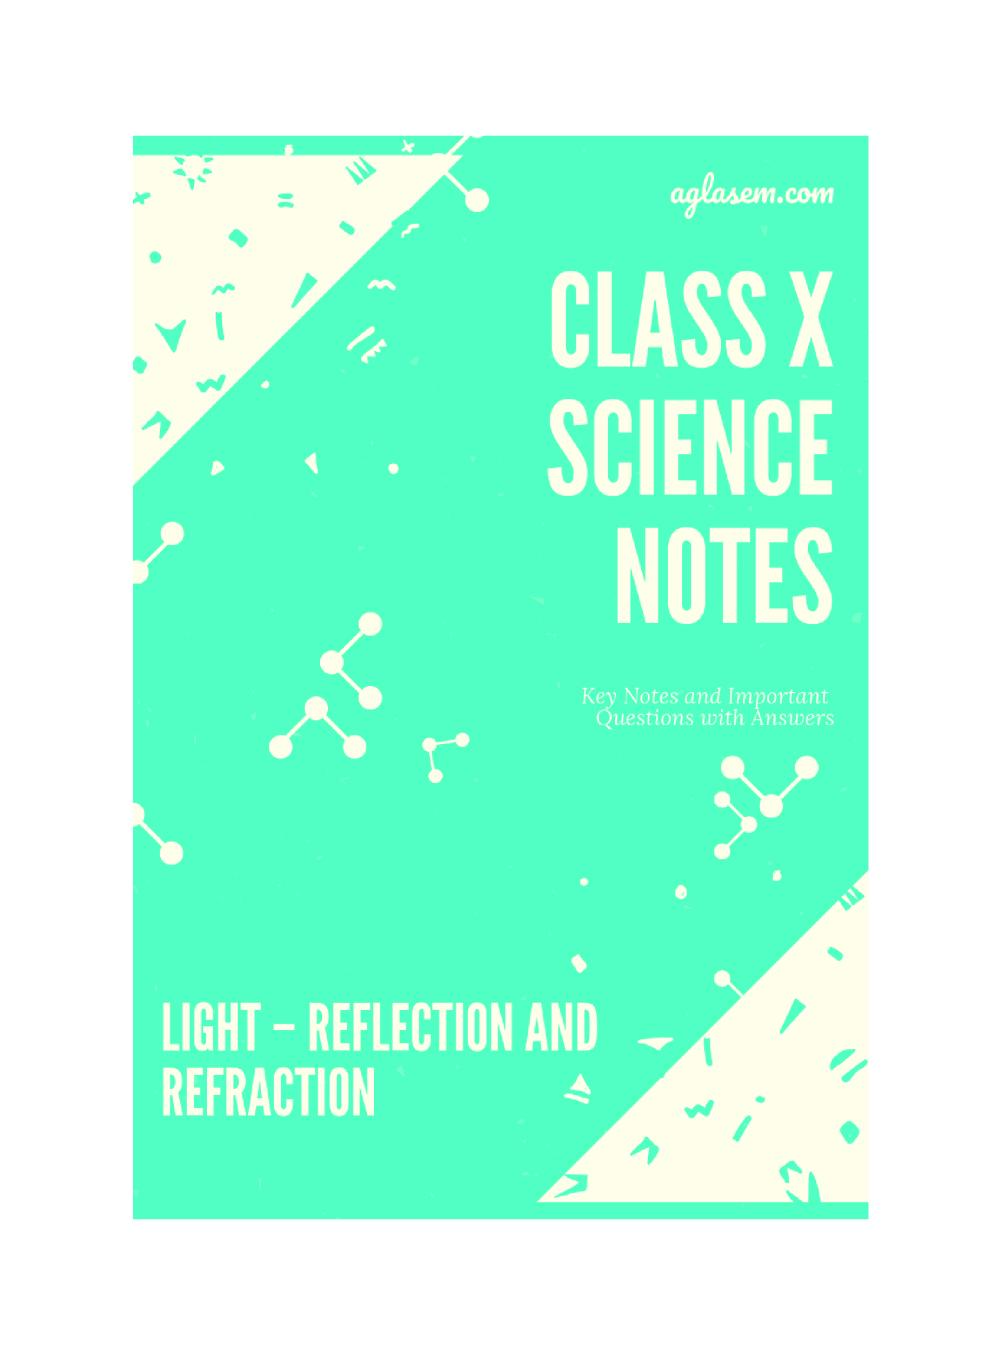 Class 10 Science Notes for Light- Reflection and Refraction - Page 1